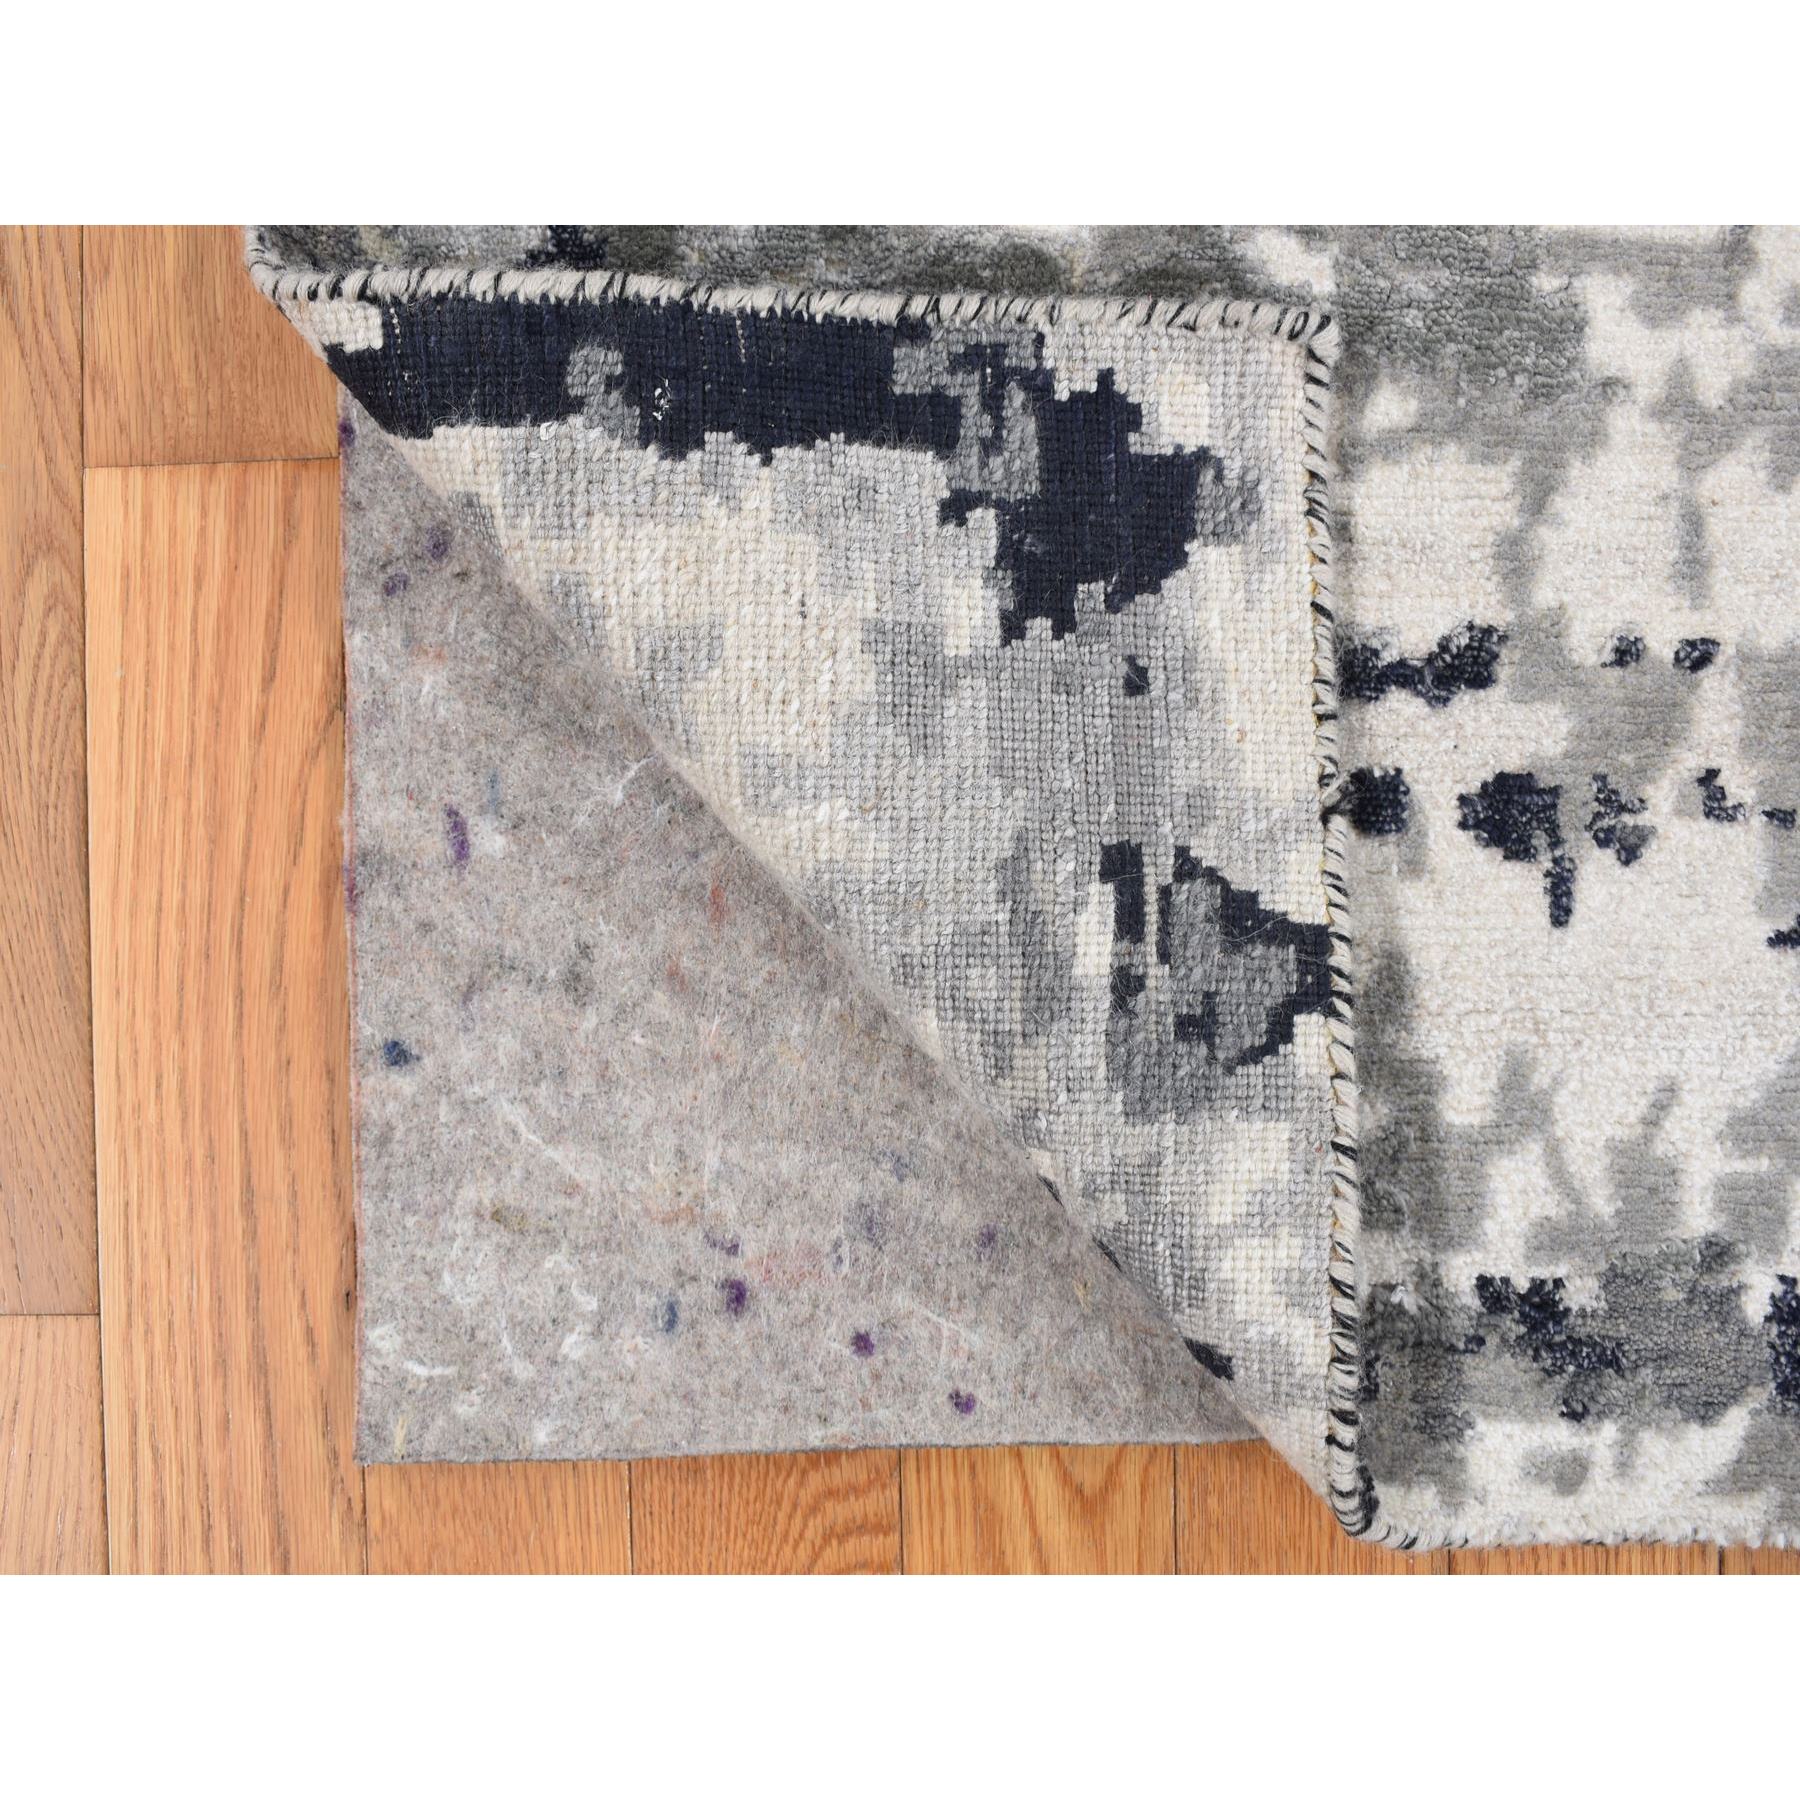  Silk Hand-Knotted Area Rug 2'1